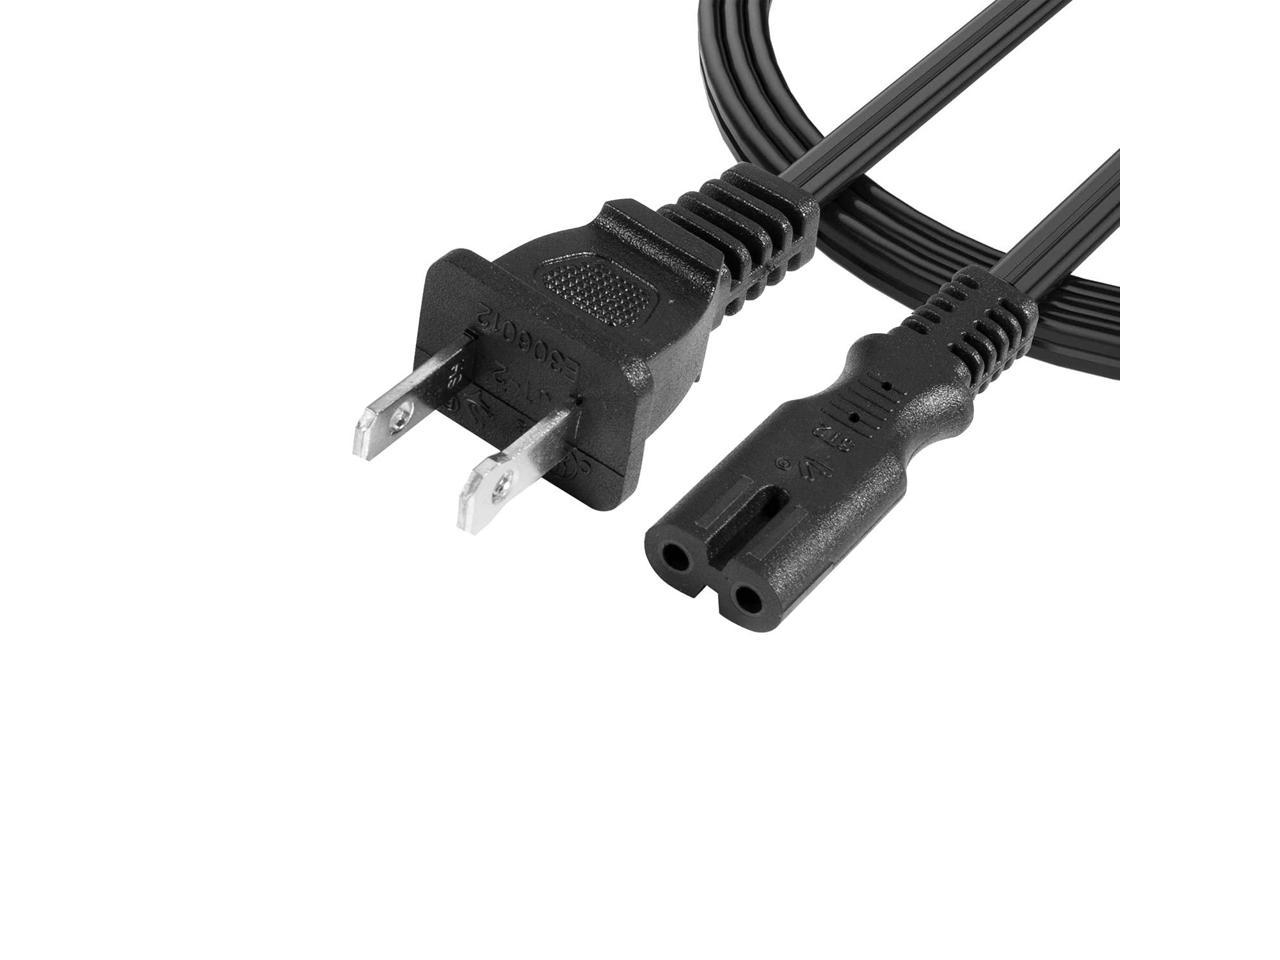 IP6000D IP6210D PRINTER NEW 6 ft iP5300 POWER CORD CABLE for PIXMA iP5200 